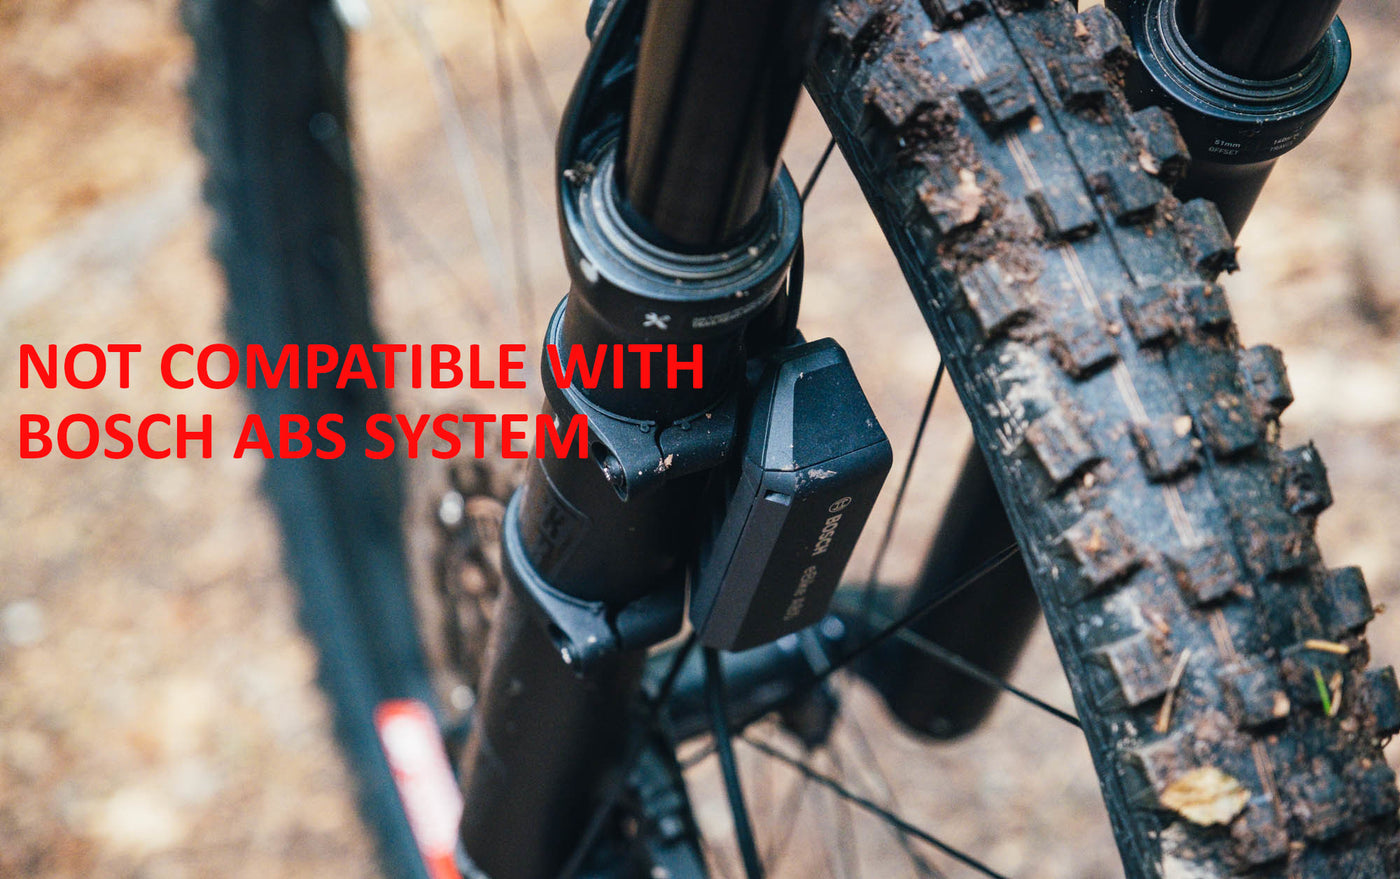 E-bike tuning for Bosch Smart System - Wiesel Tuning